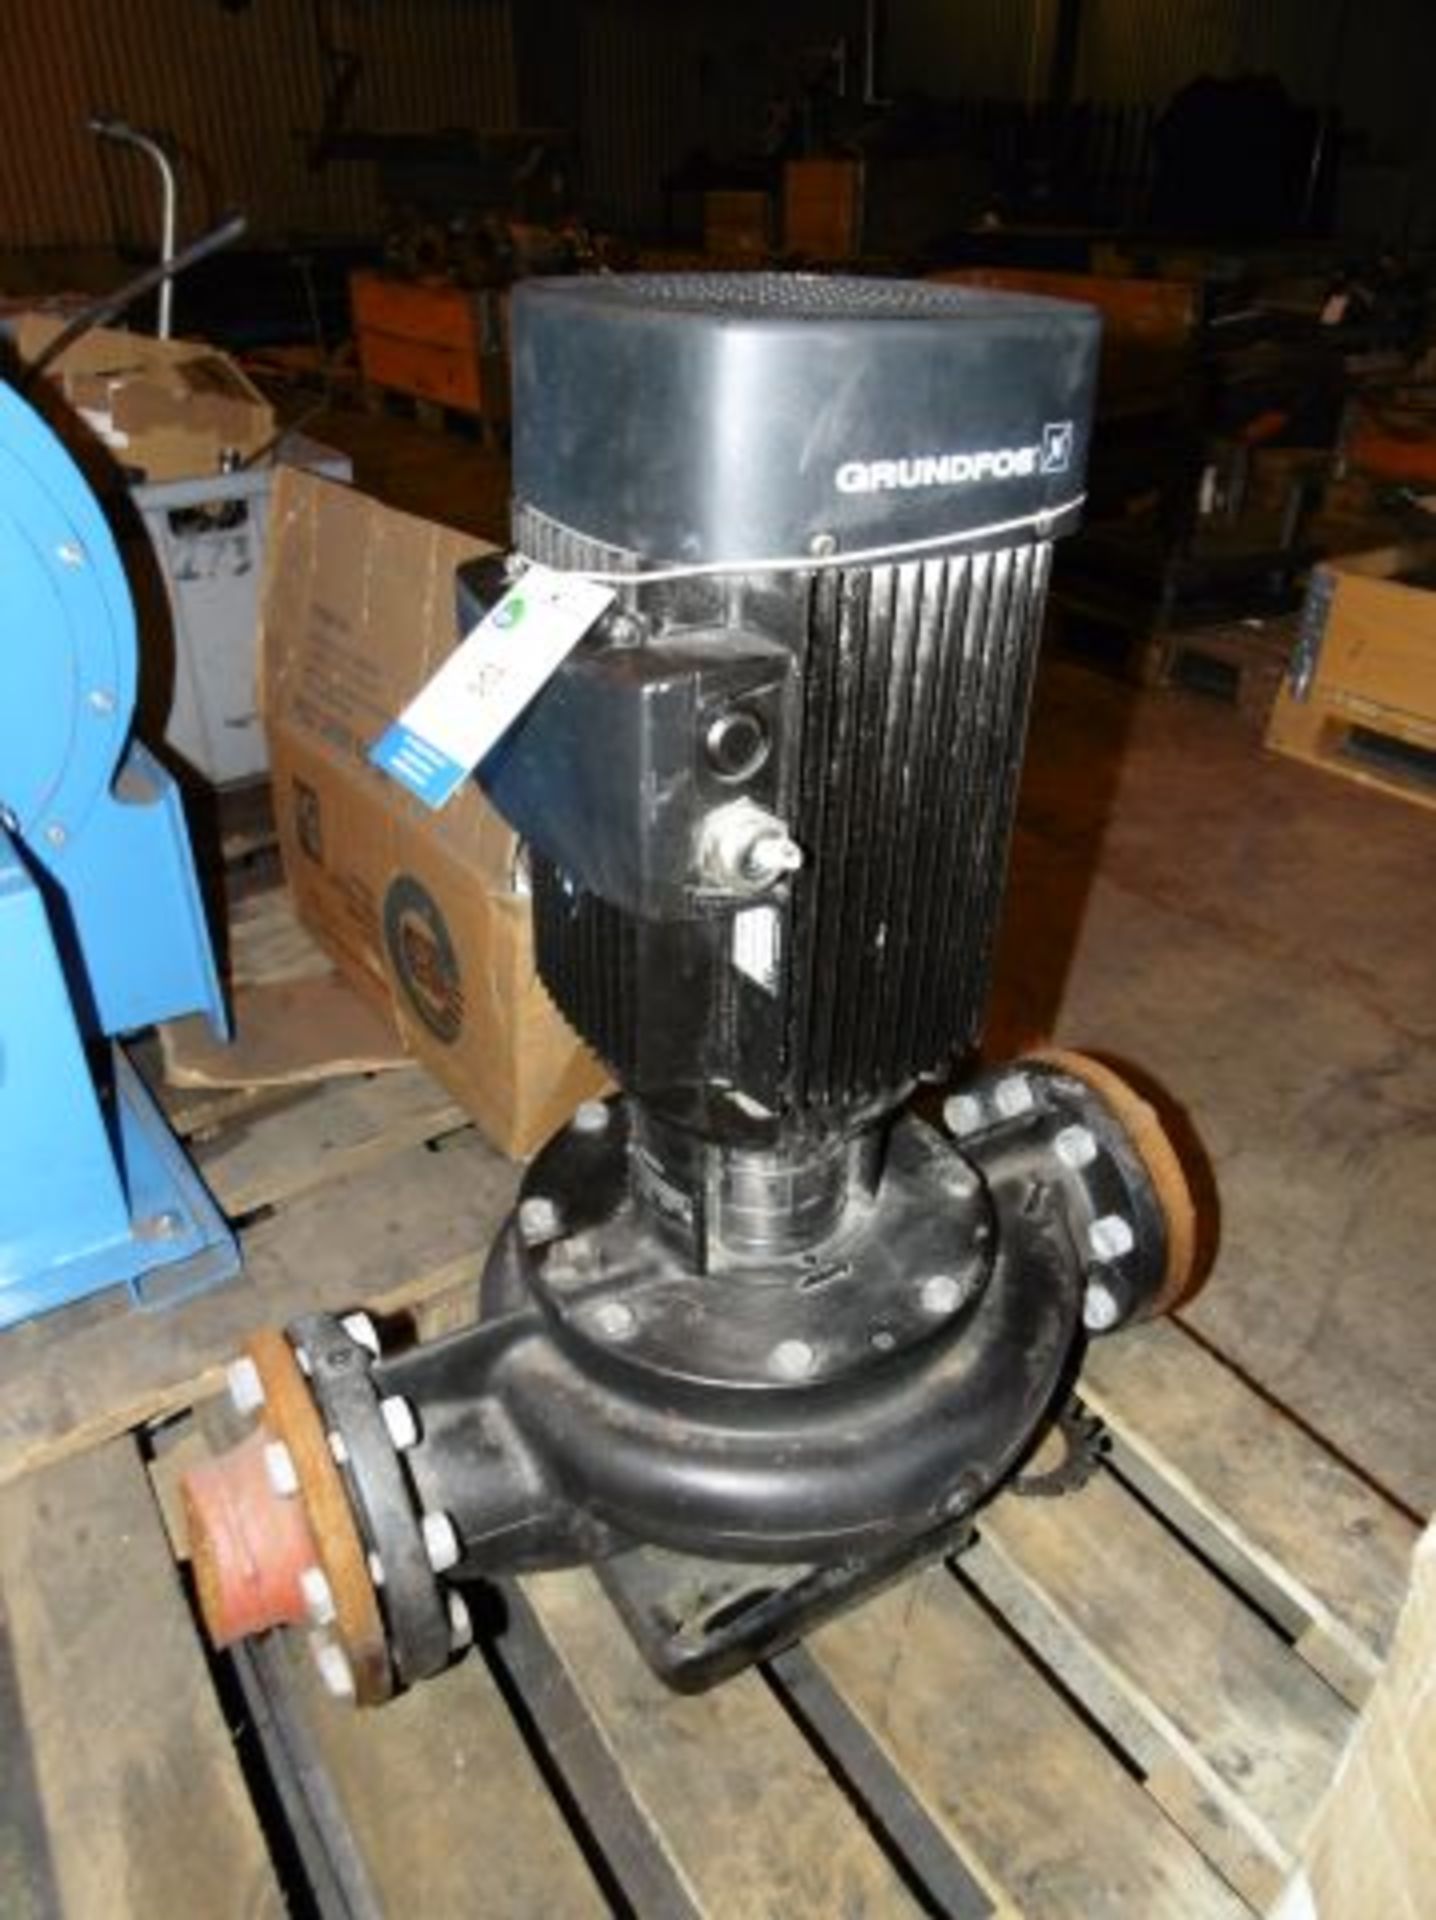 * Grundfos type LM 80-200/210 A-F-A-BBUE Pump with 4.0kw Motor. Loaded onto Buyer's Transport